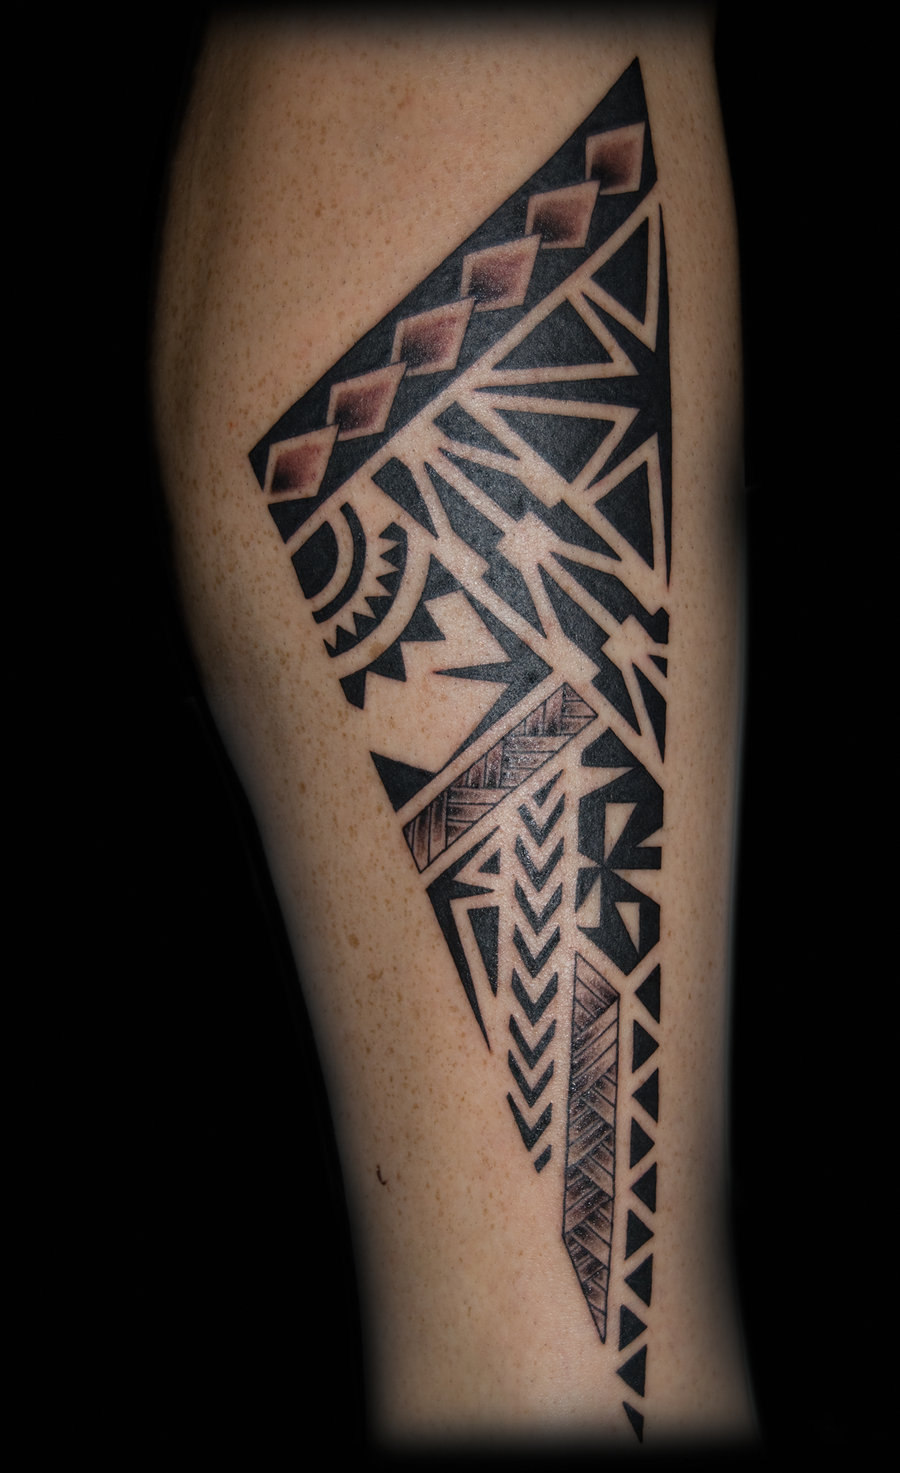 Maori Tattoos Designs, Ideas and Meaning | Tattoos For You